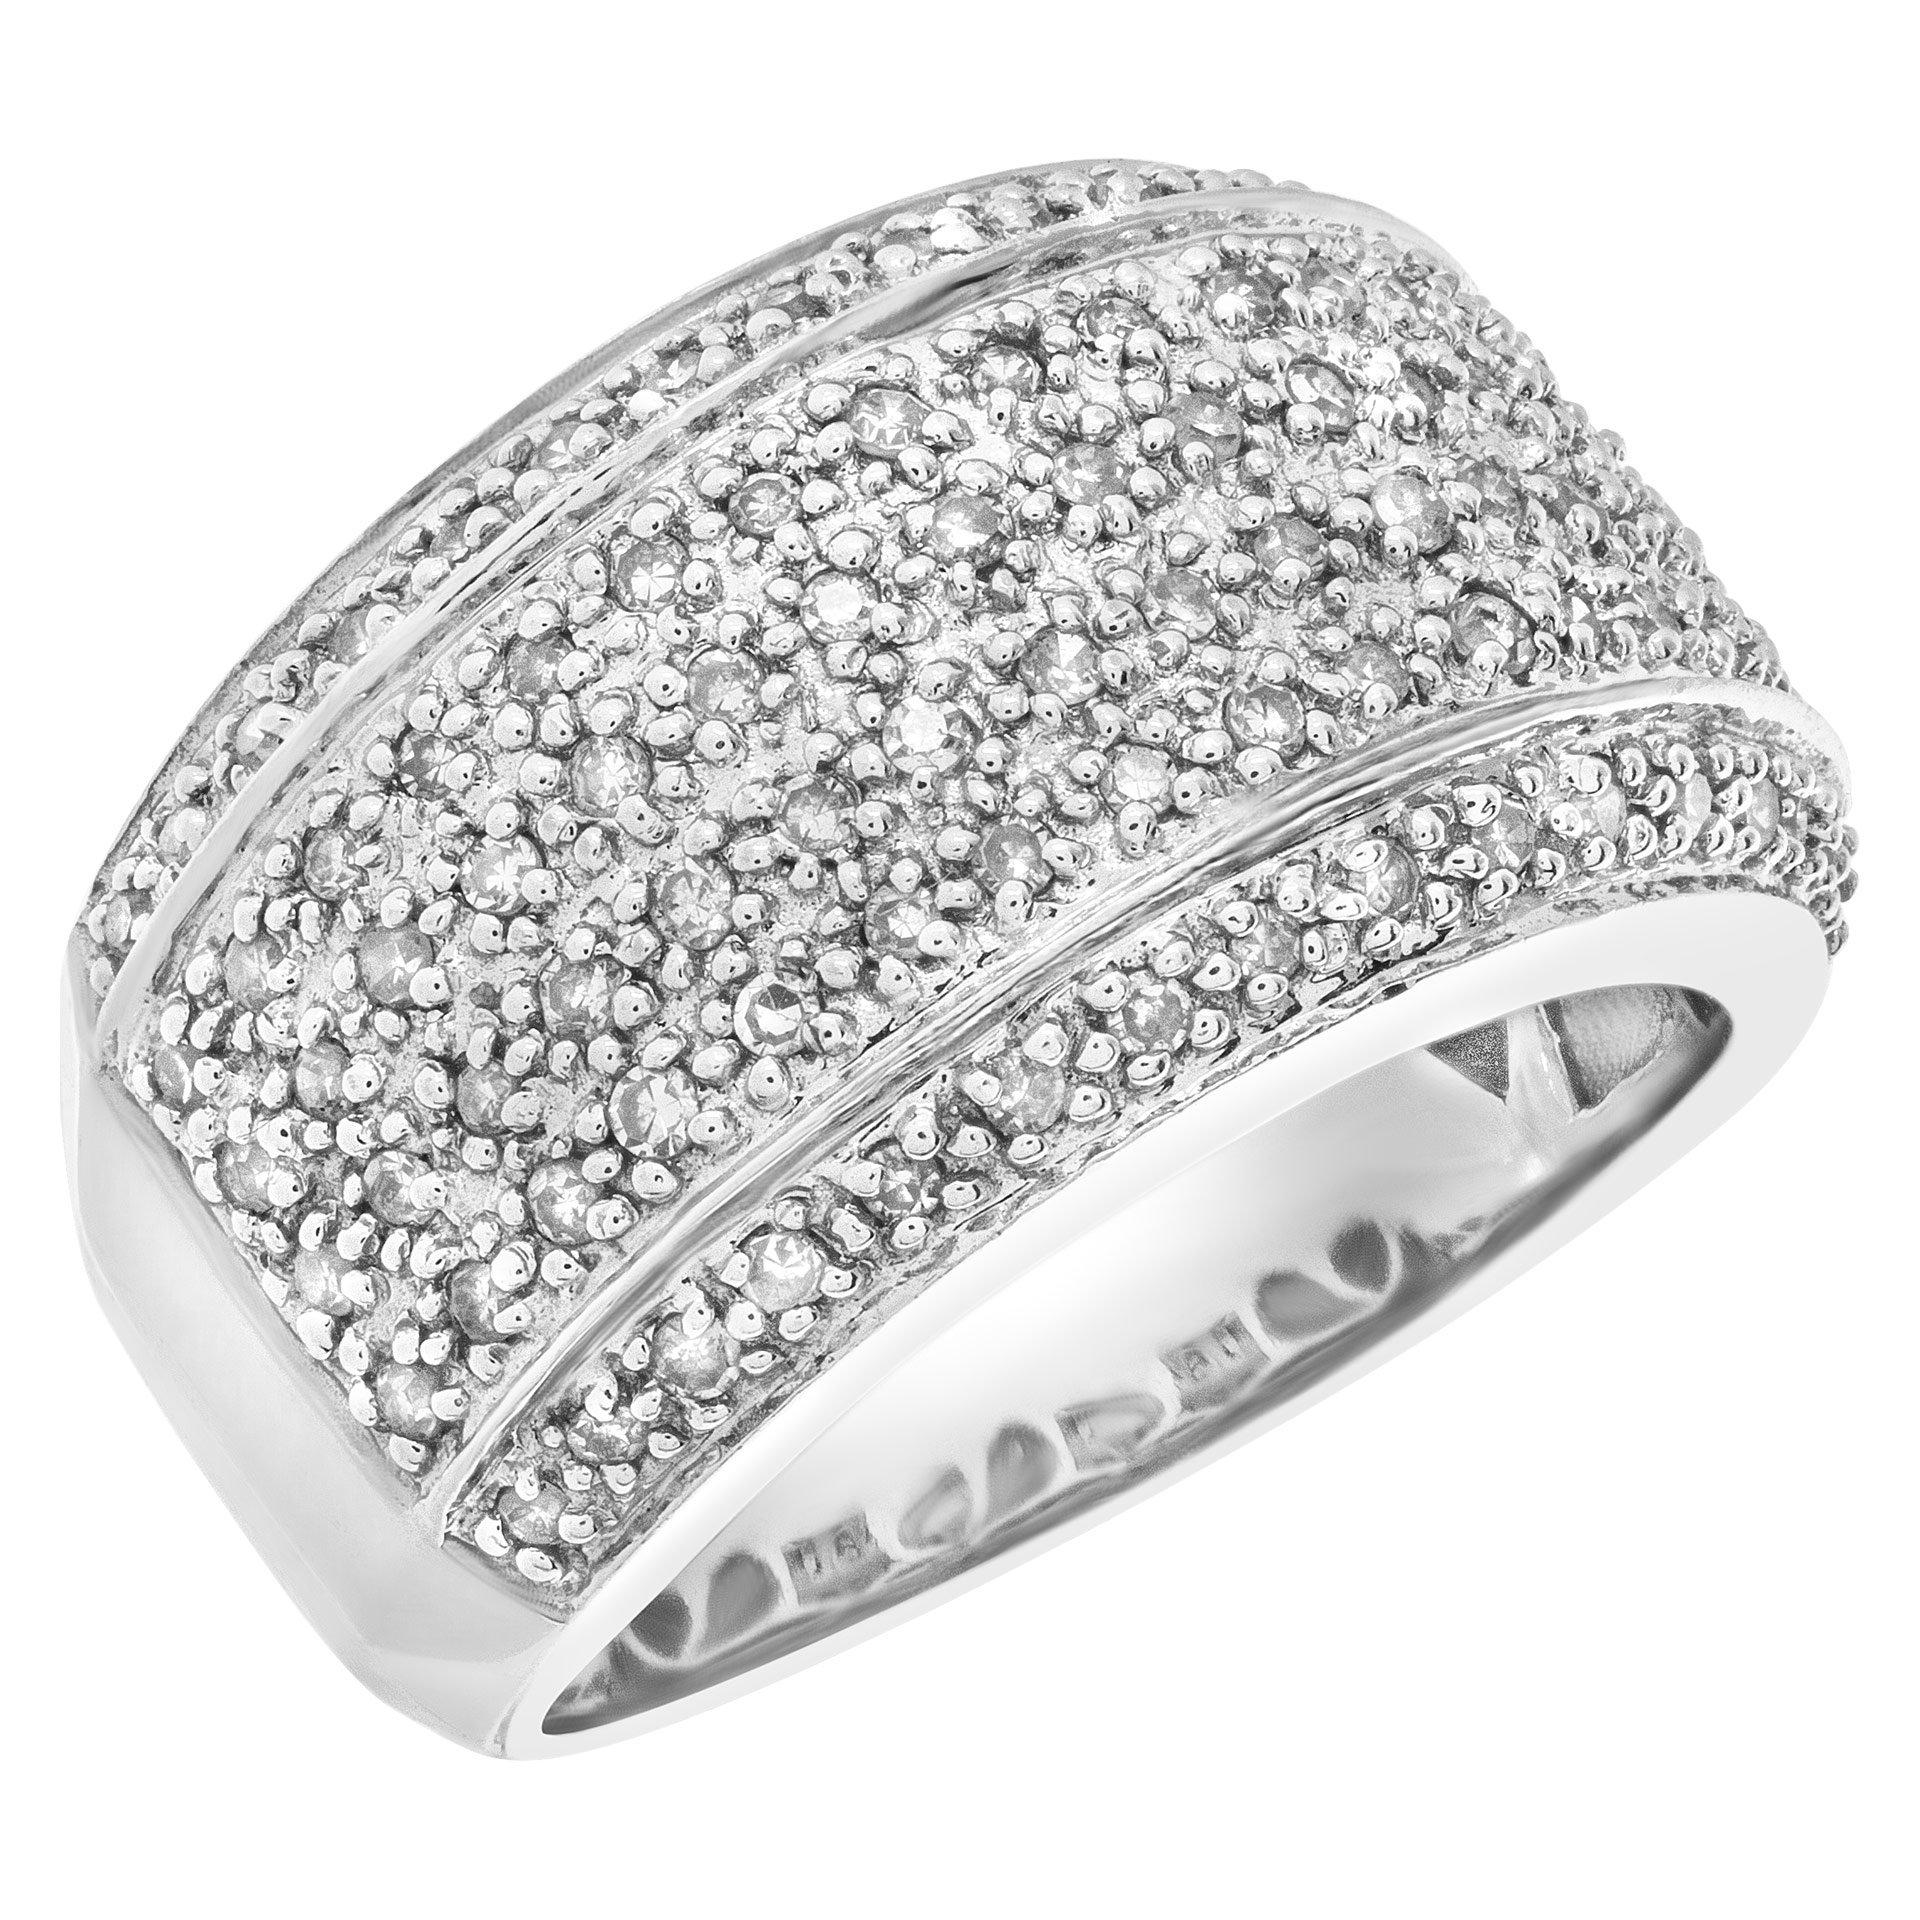 Pave Wide pave diamond ring in 14k white gold with approximately 0.96 carats in diamonds. Width at top: 13mm, width at shank: 6.5mm. Size 7.

This Diamond ring is currently size 7 and some items can be sized up or down, please ask! It weighs 5.1